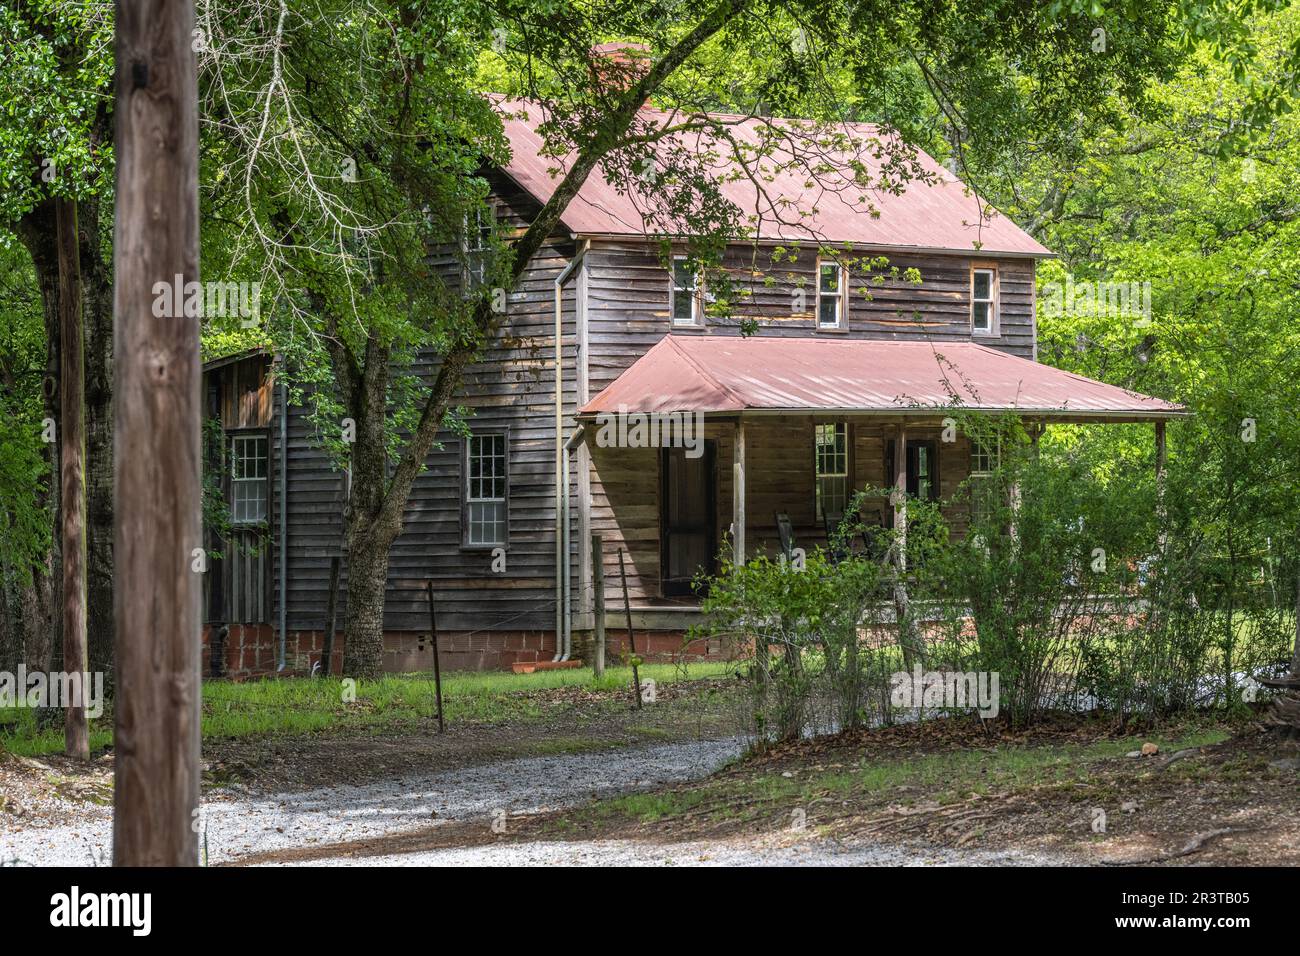 The mid-19th century historic Hill House, a tenant farmhouse, at  Andalusia Farm, the home of writer Flannery O'Connor (1925-1964.) (USA) Stock Photo